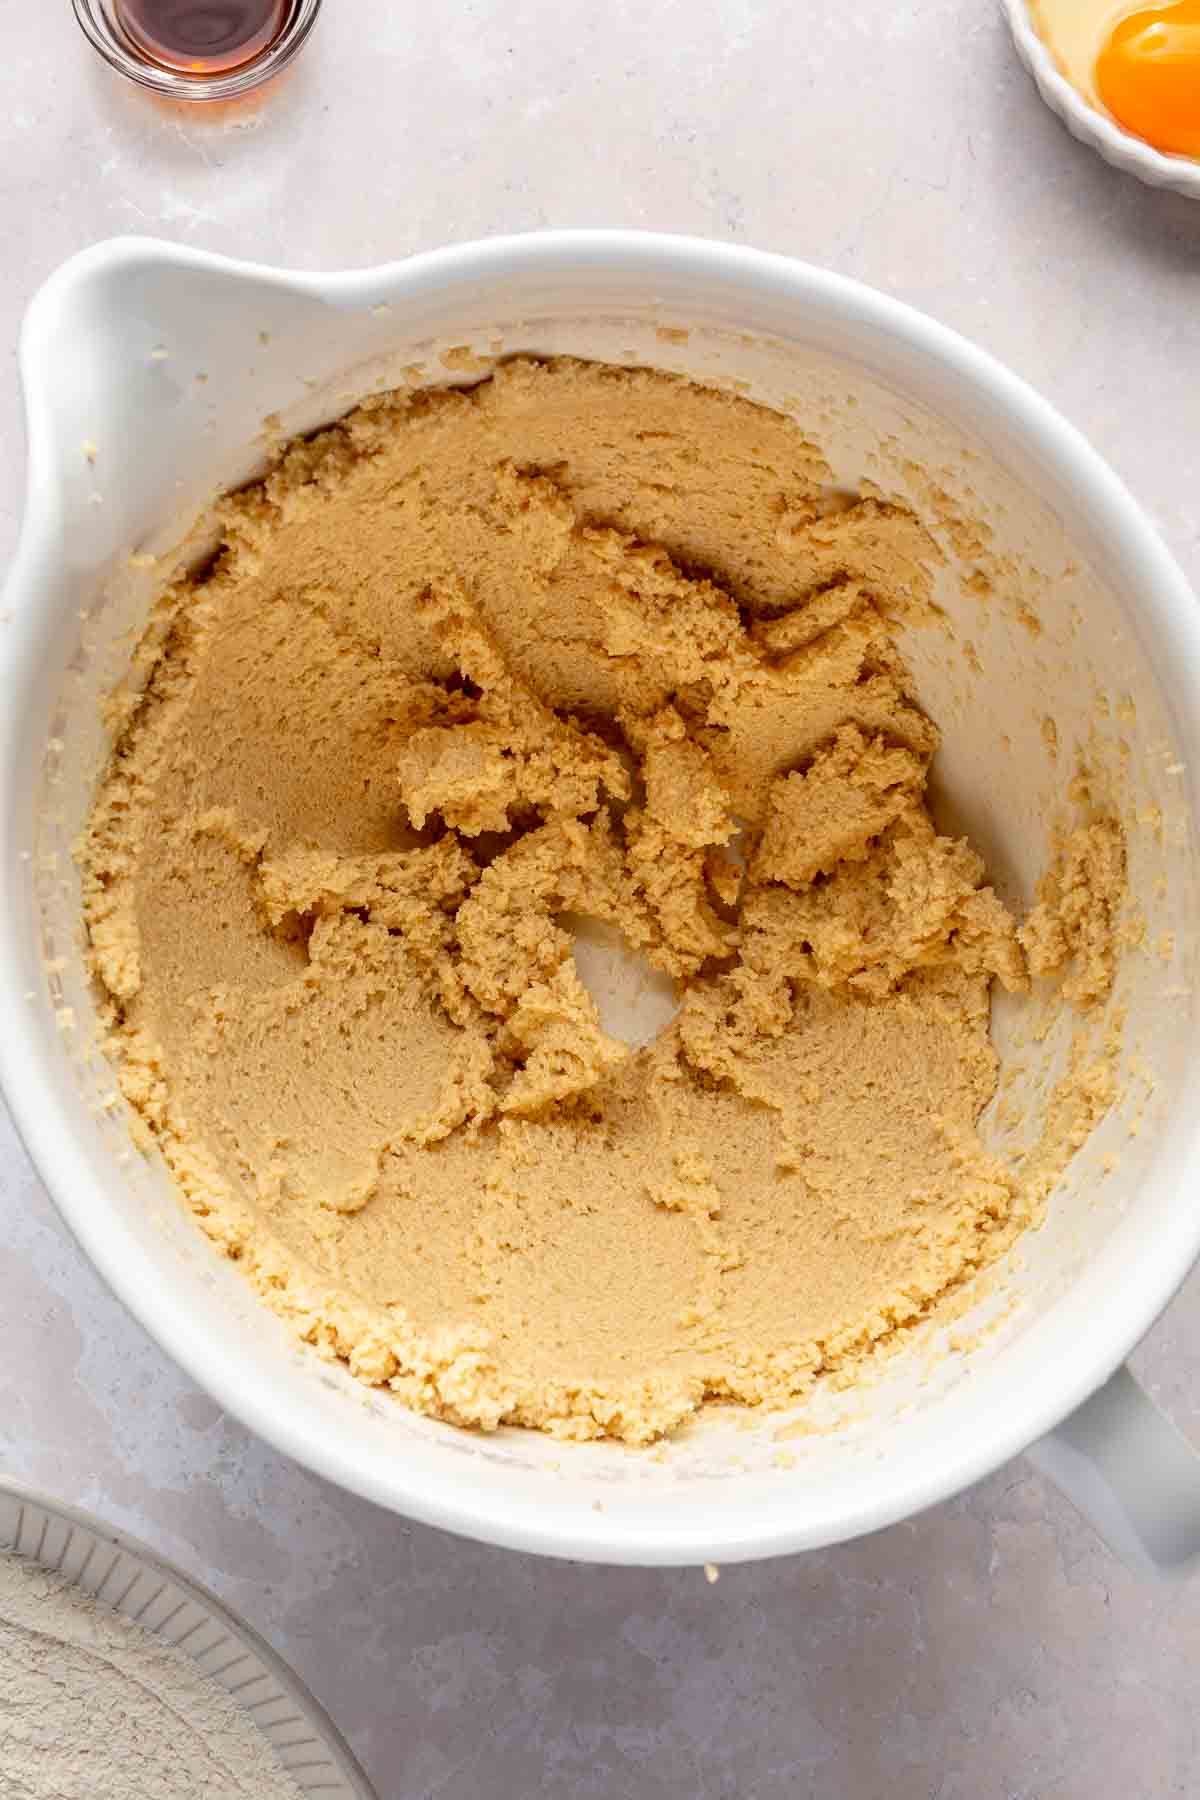 Butter and brown sugar mixed in a bowl.